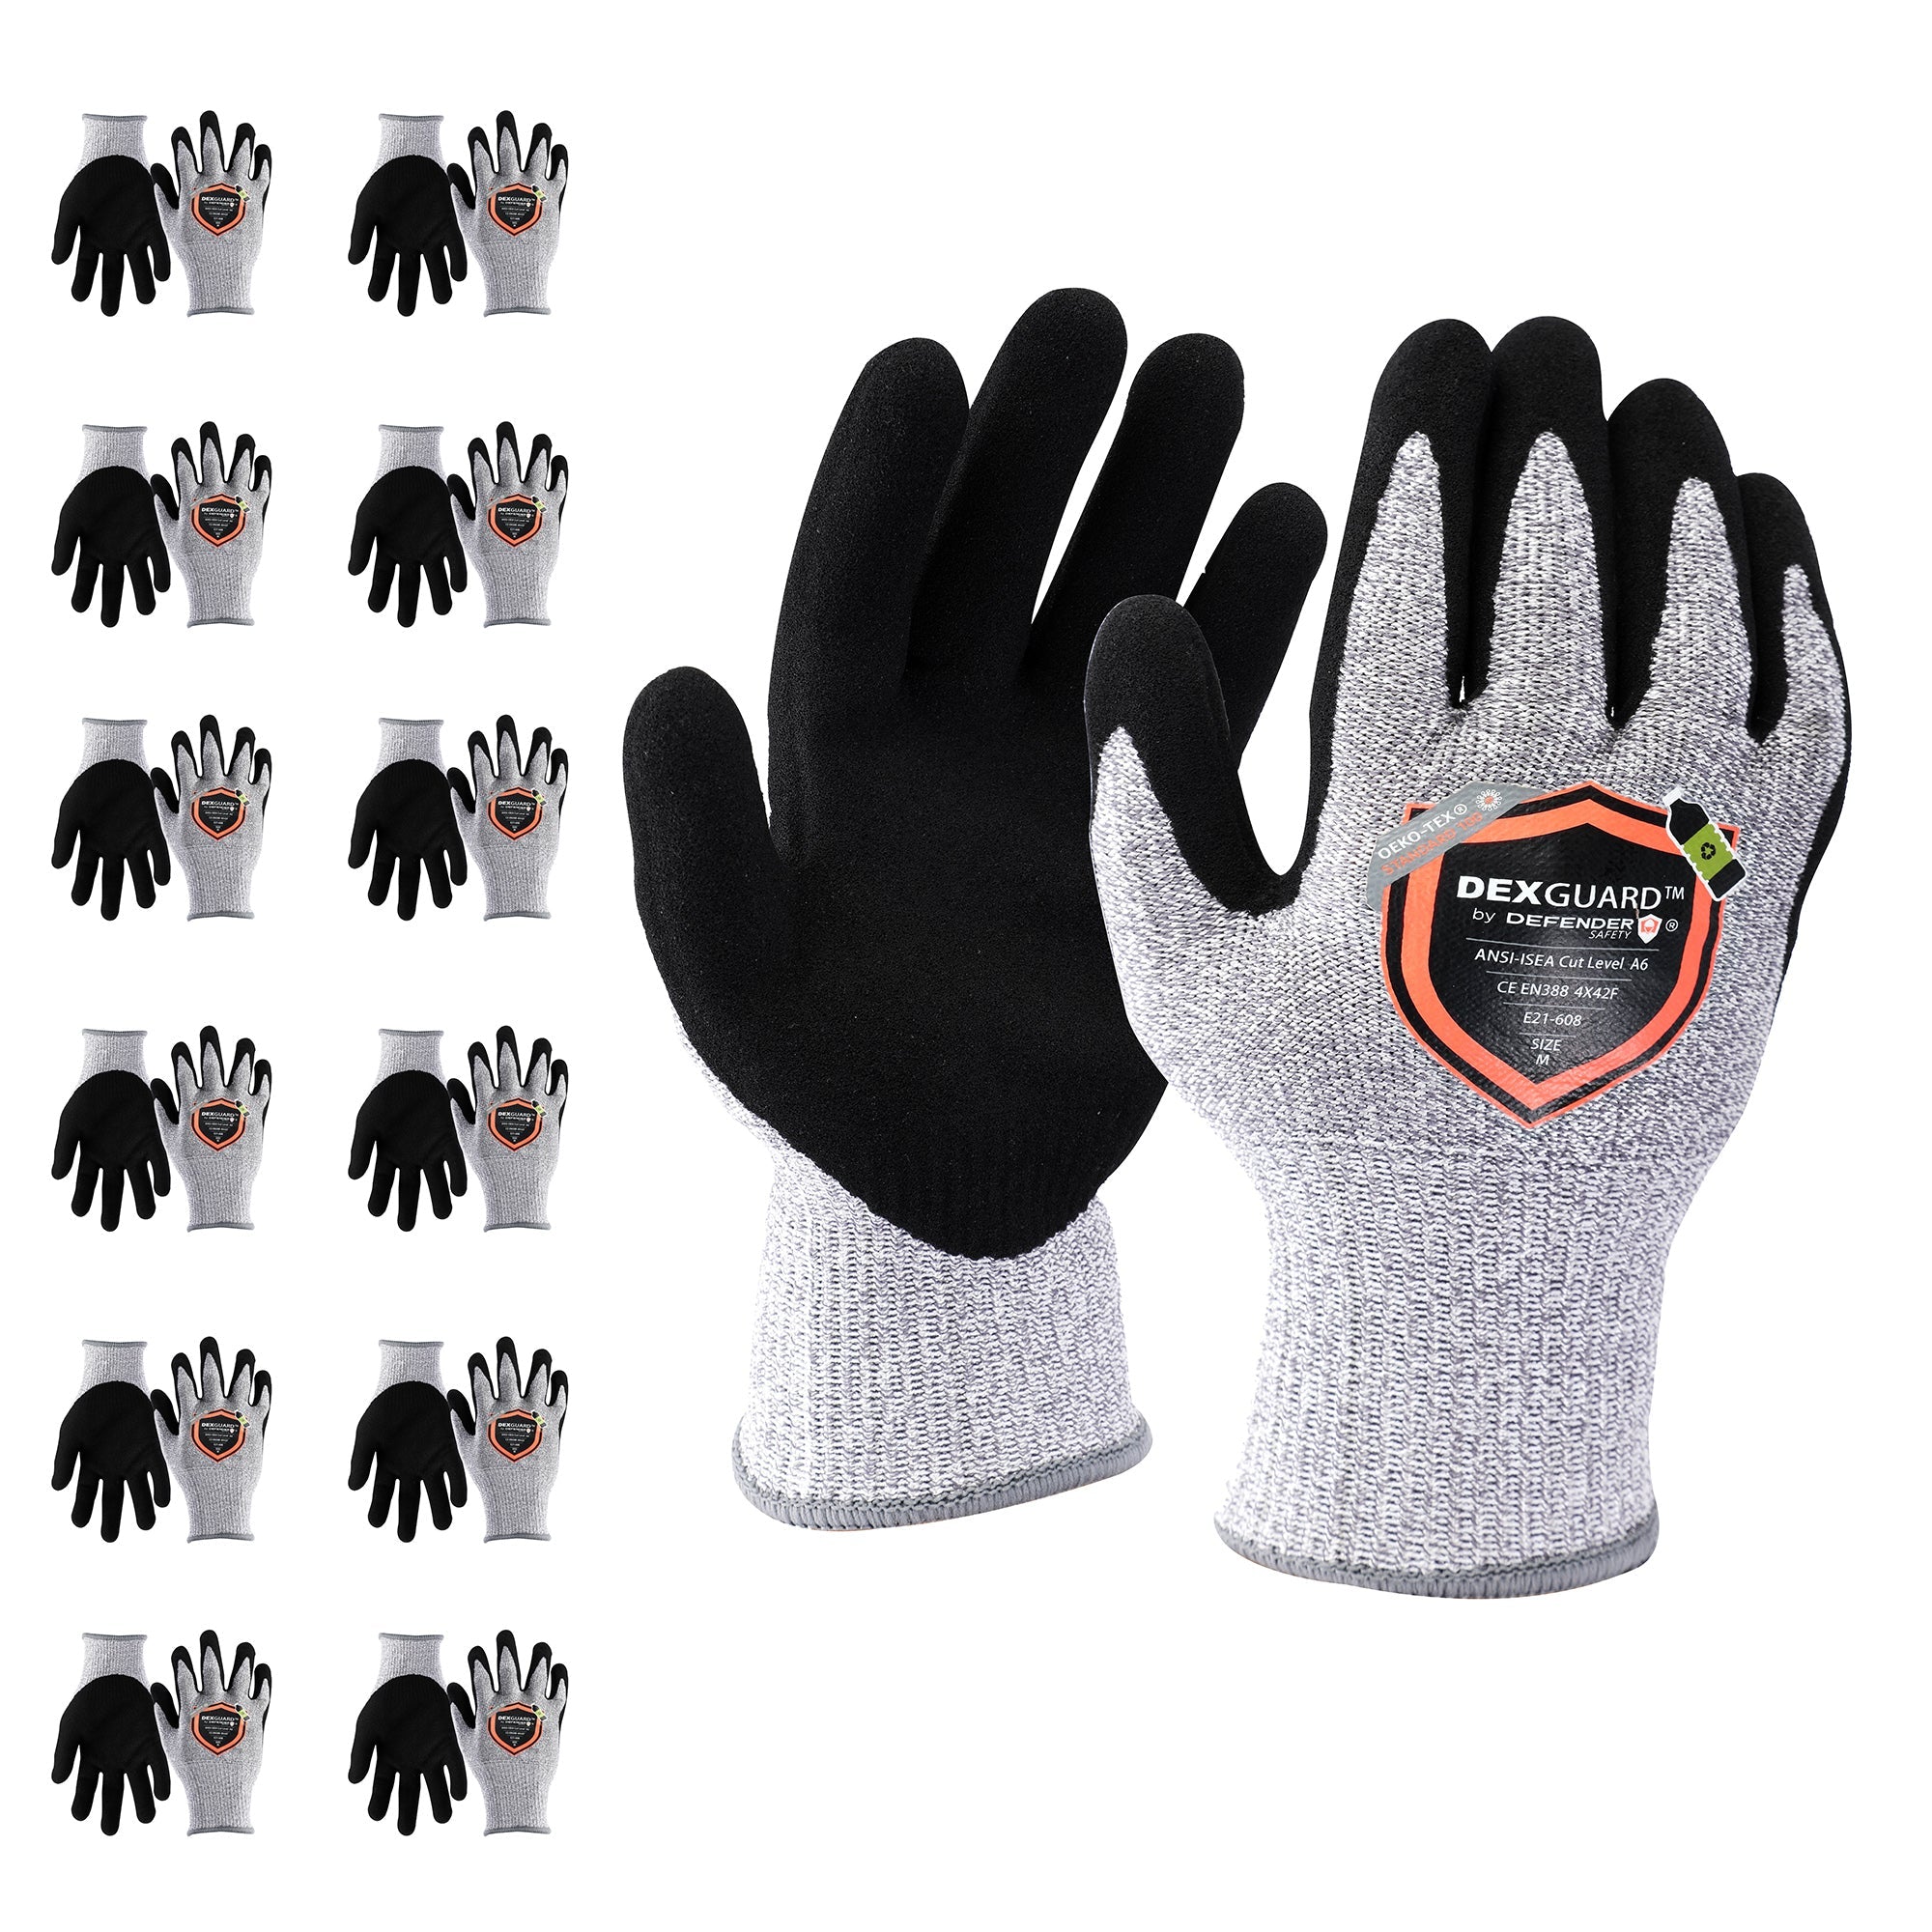 DEXGUARD™ A6 Cut Gloves, 13G Liner, Level 4 Abrasion Resistant, Textured  Nitrile Coating, Touch Screen Compatible